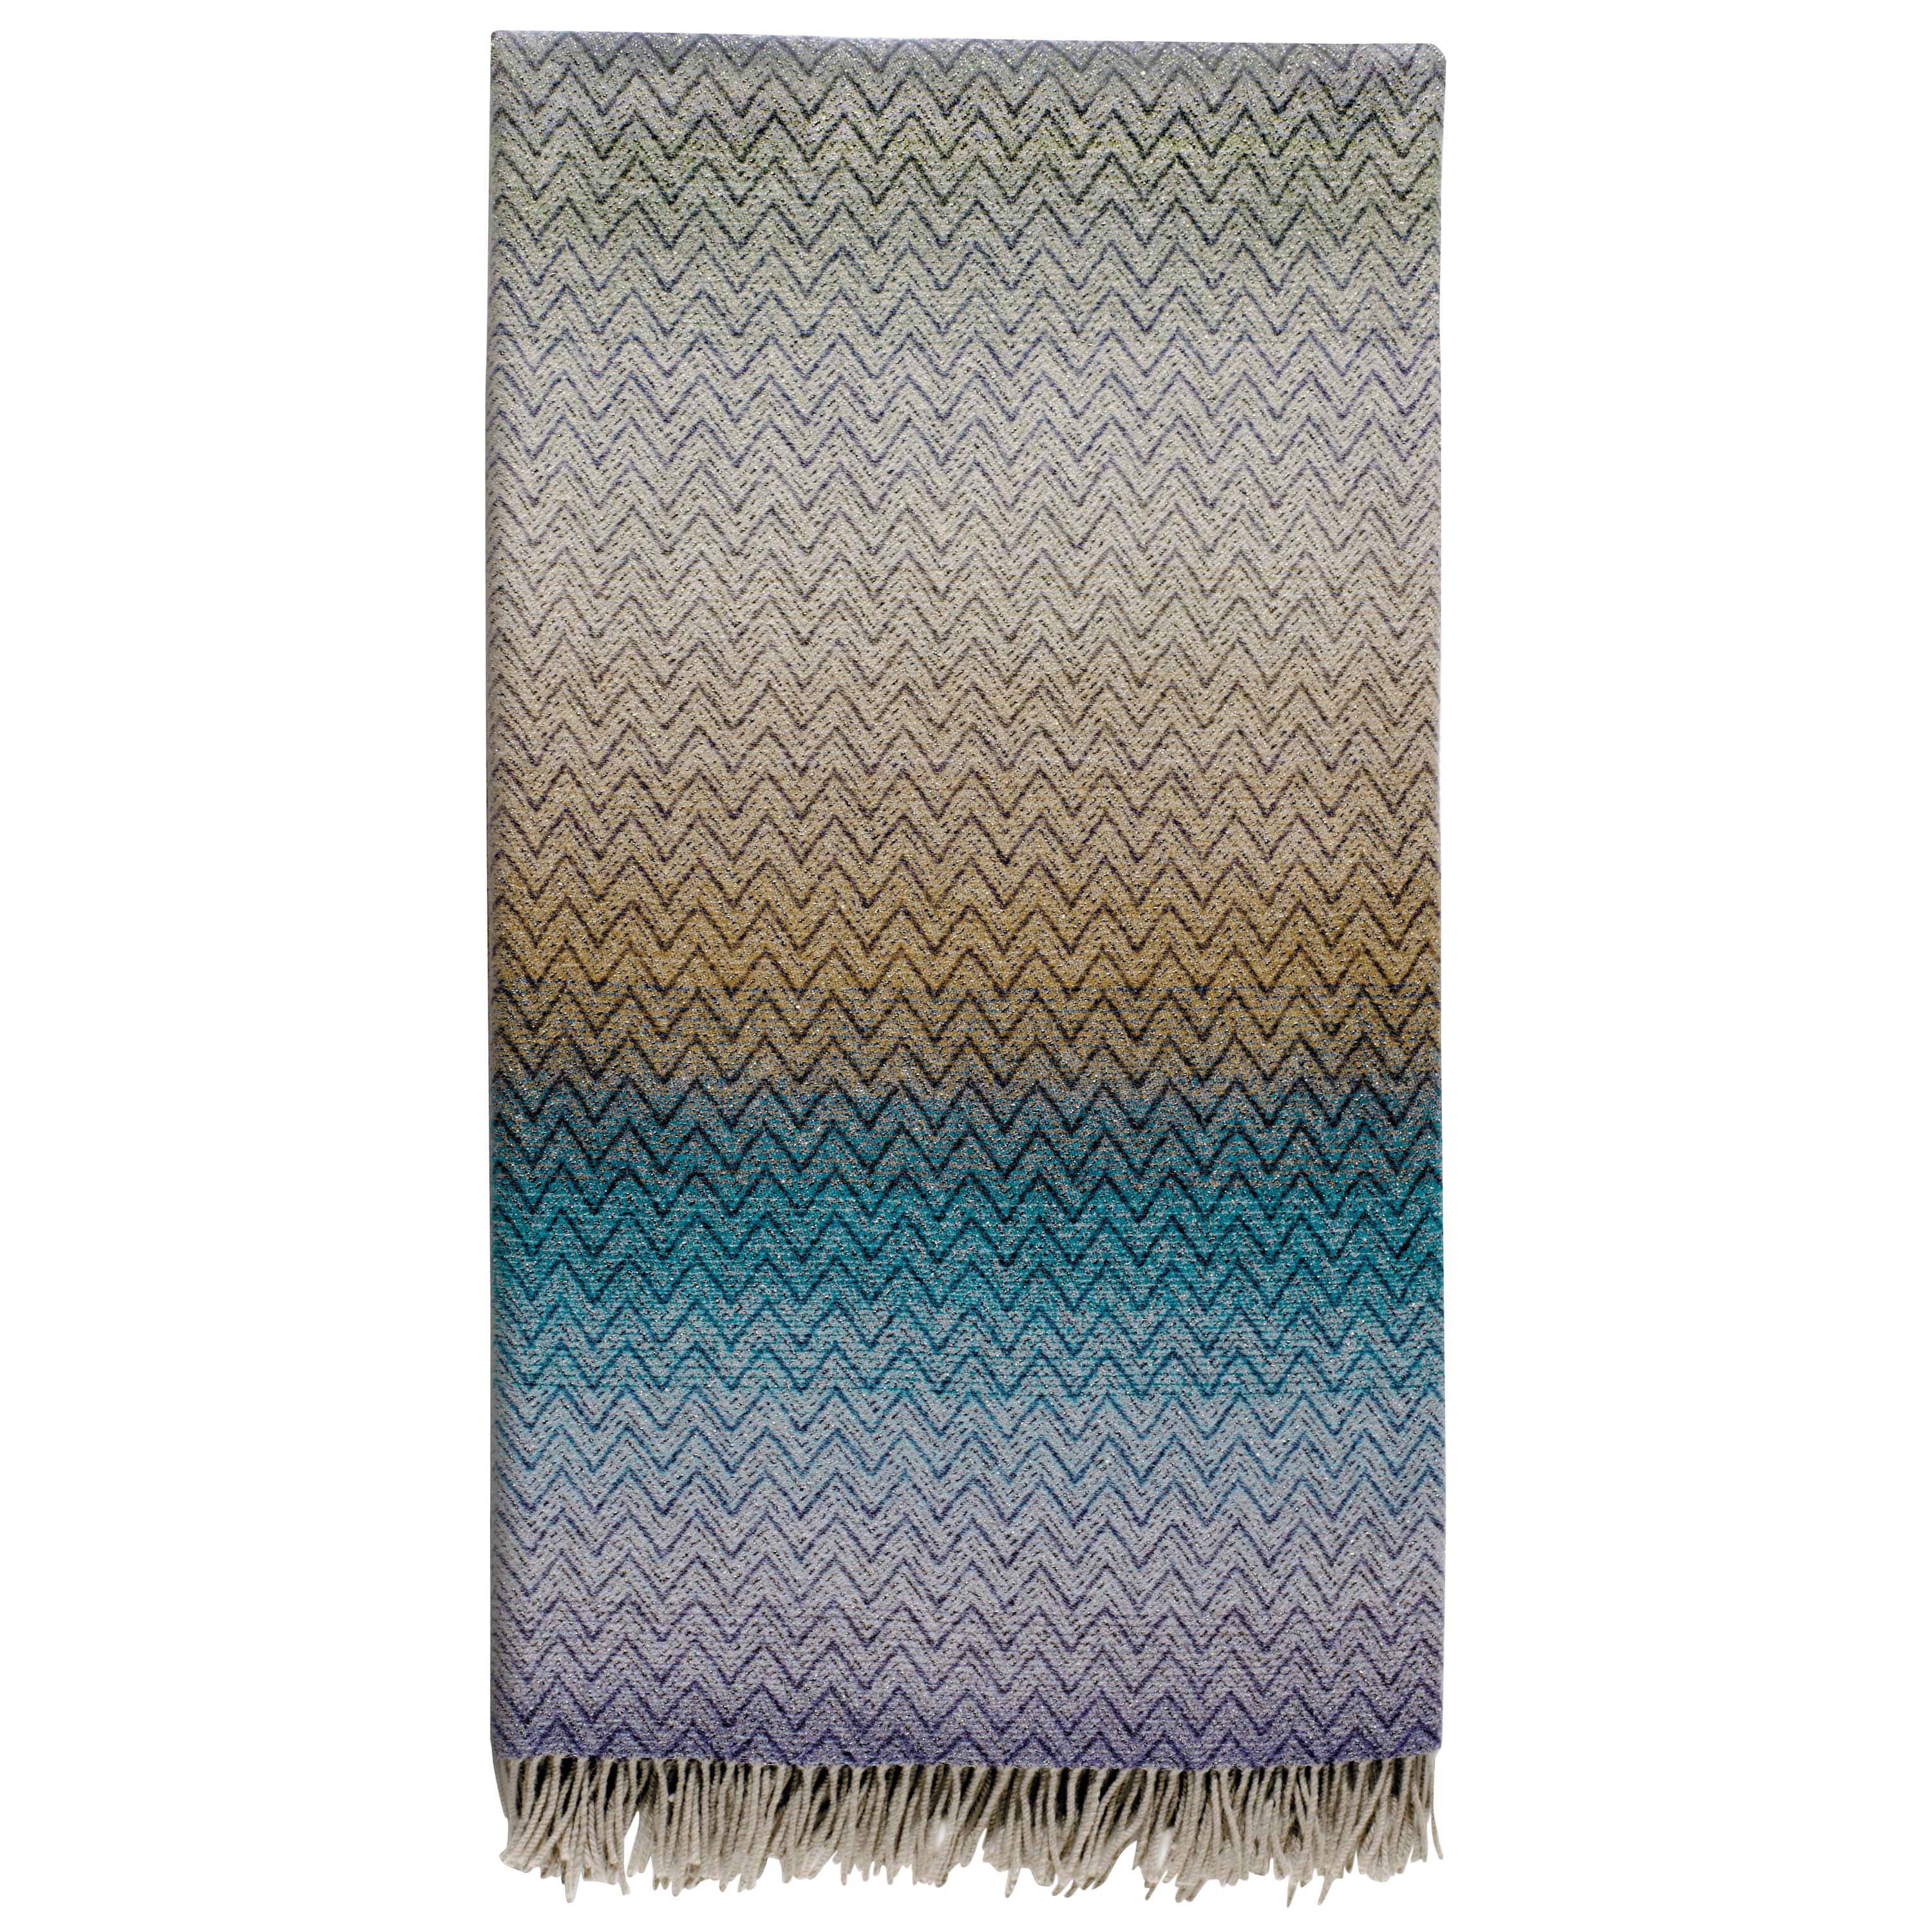 Missoni Home Pascal Throw in Multi-Color Blue and Beige Gradient Chevron Print For Sale